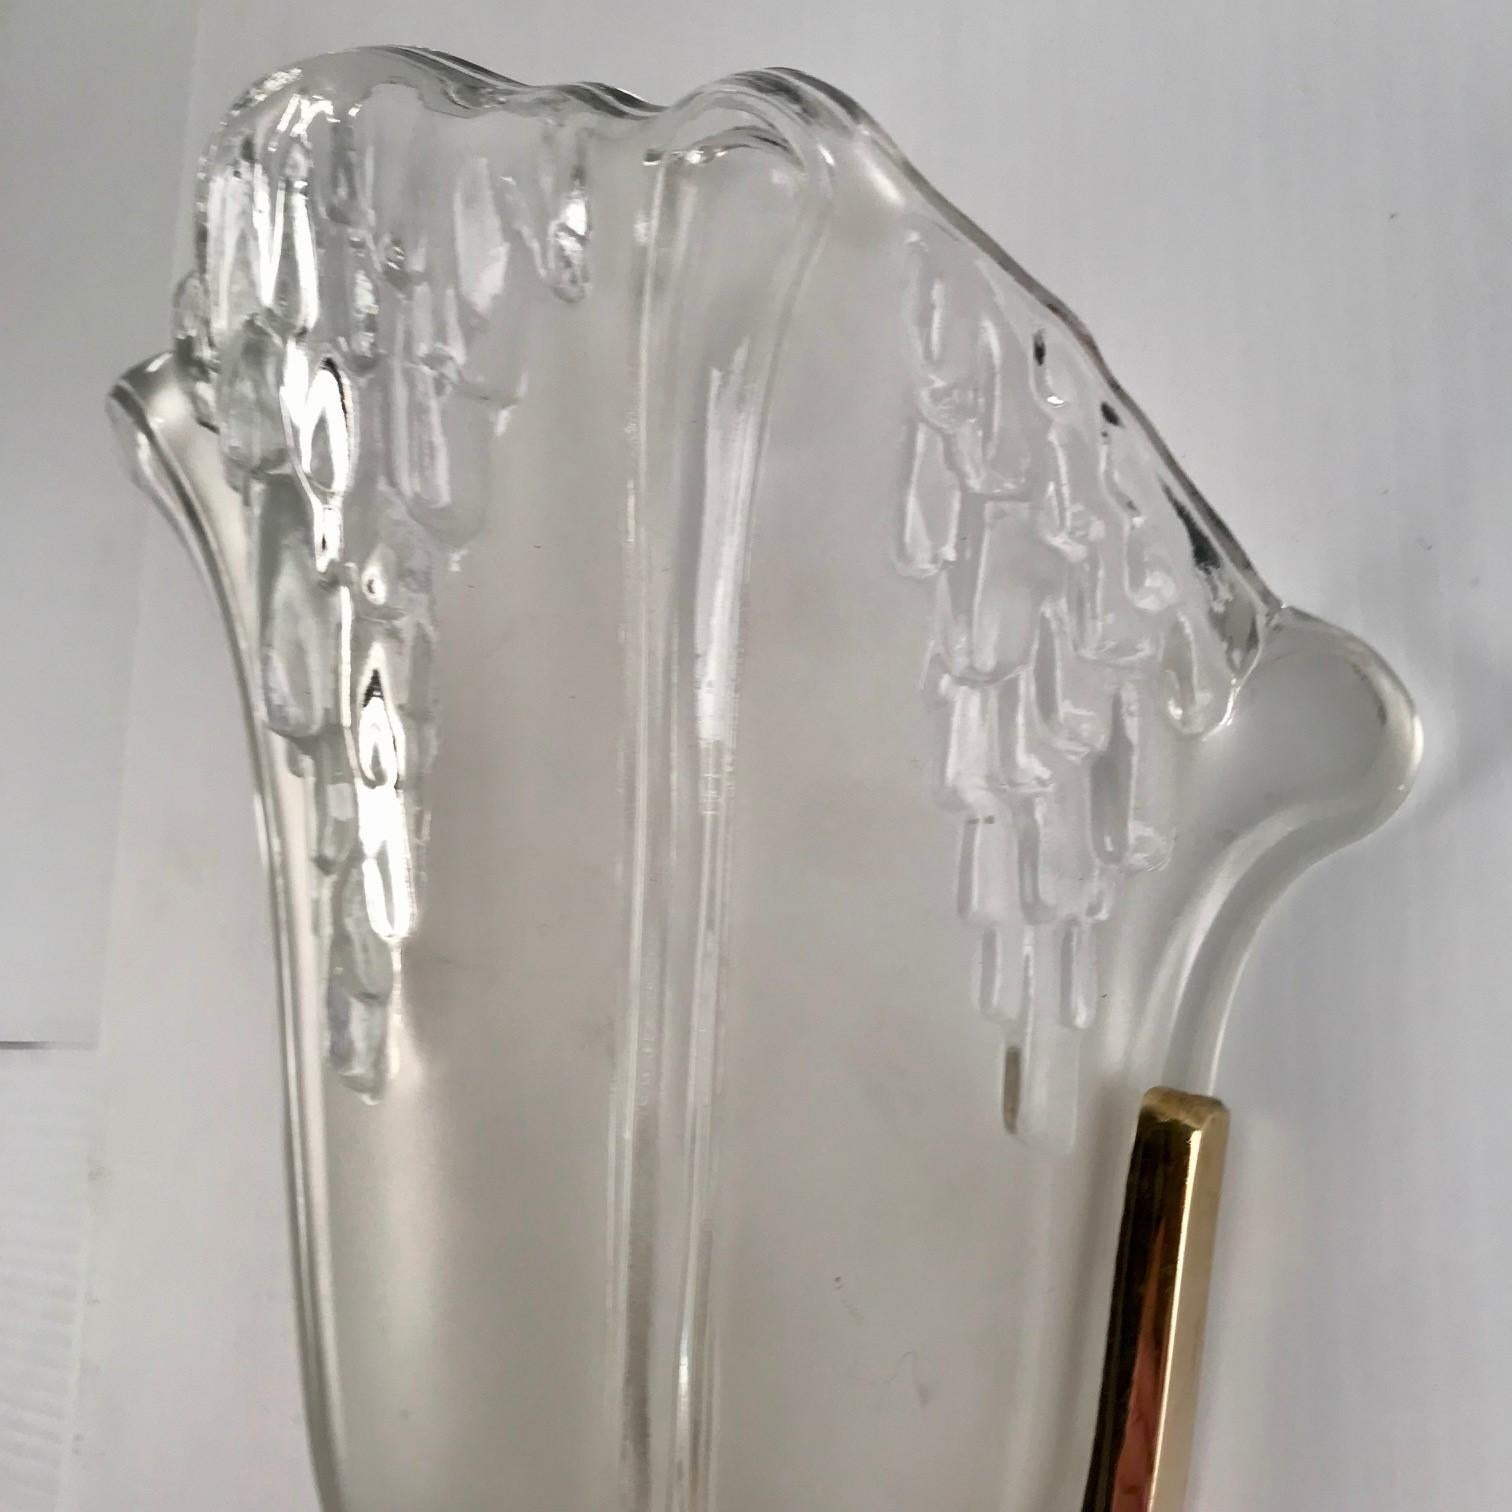  French Art Deco Wall Sconces by Petitot, 1930 Set of Four For Sale 5